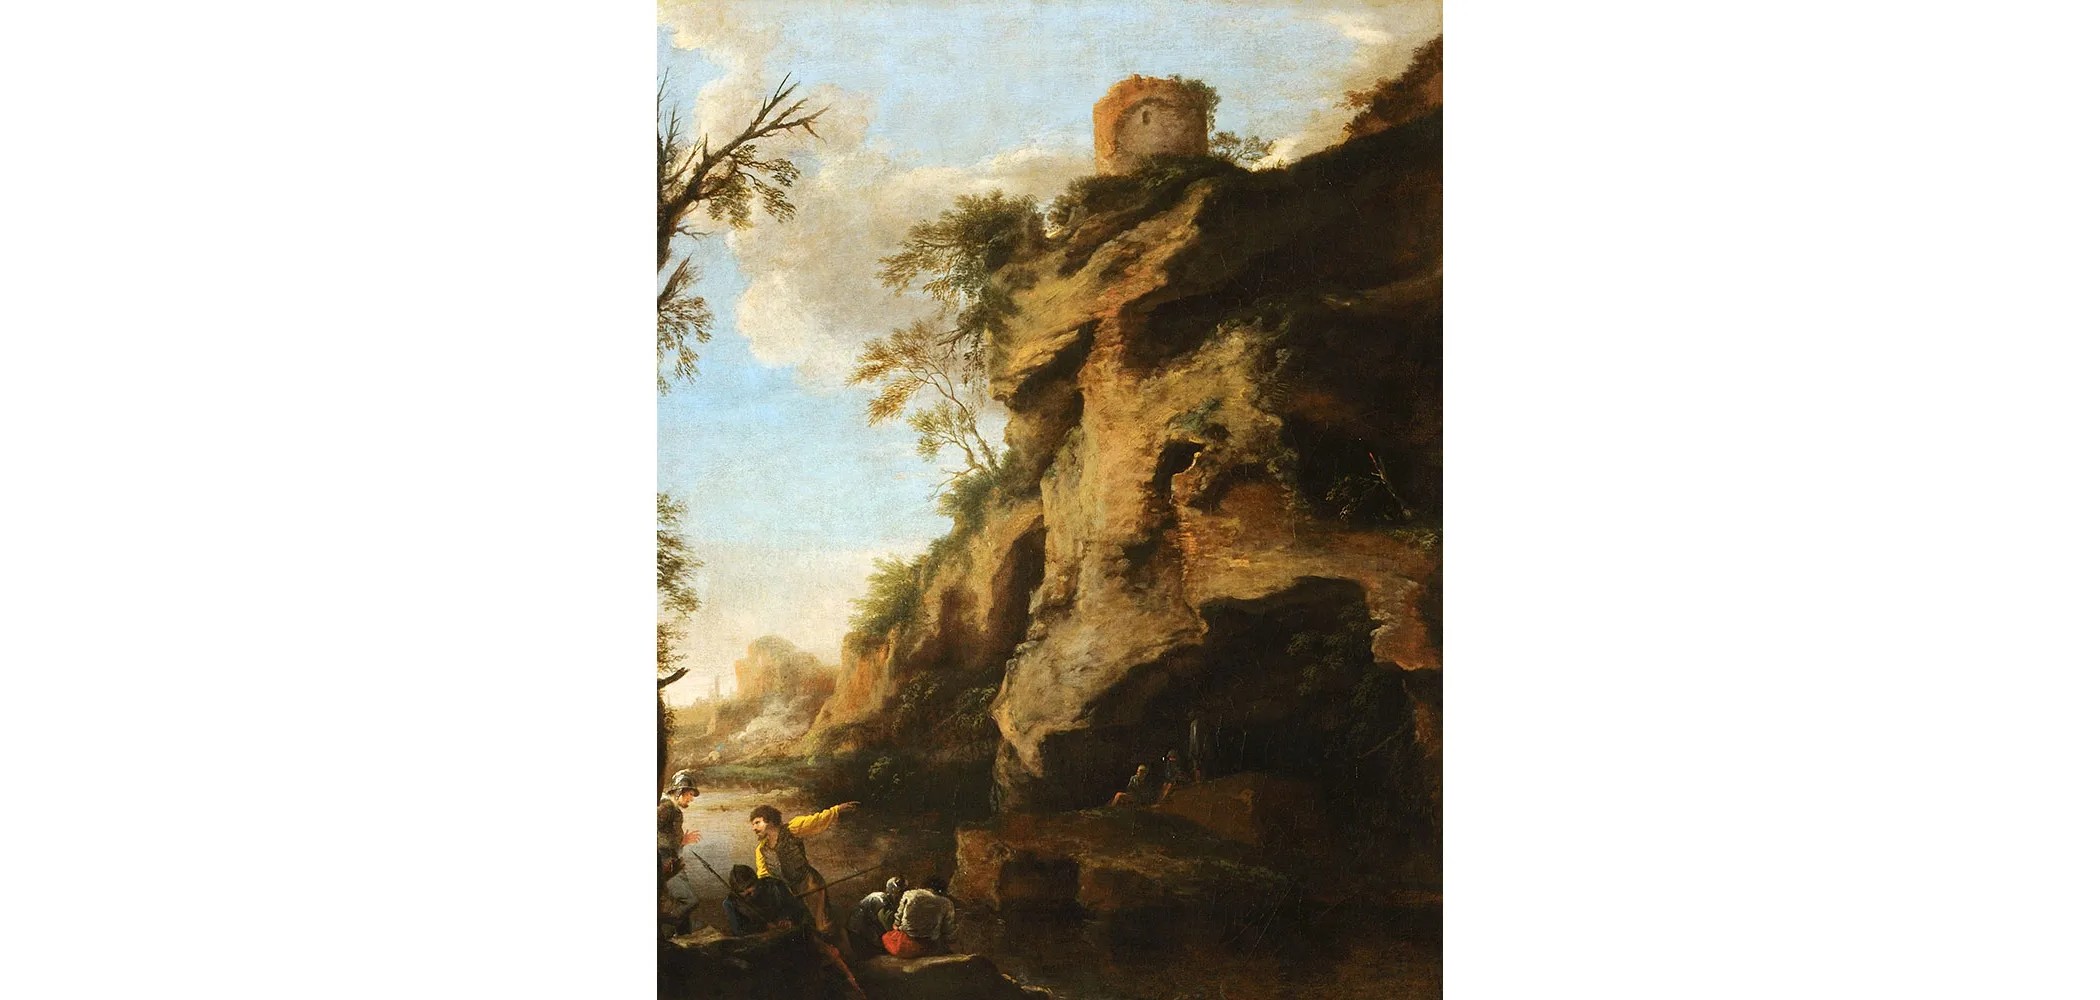 Salvatore Rosa, A Rocky Coast, with Soldiers Studying a Plan. ca. 1640s. Courtesy of the Christ Church Picture Gallery